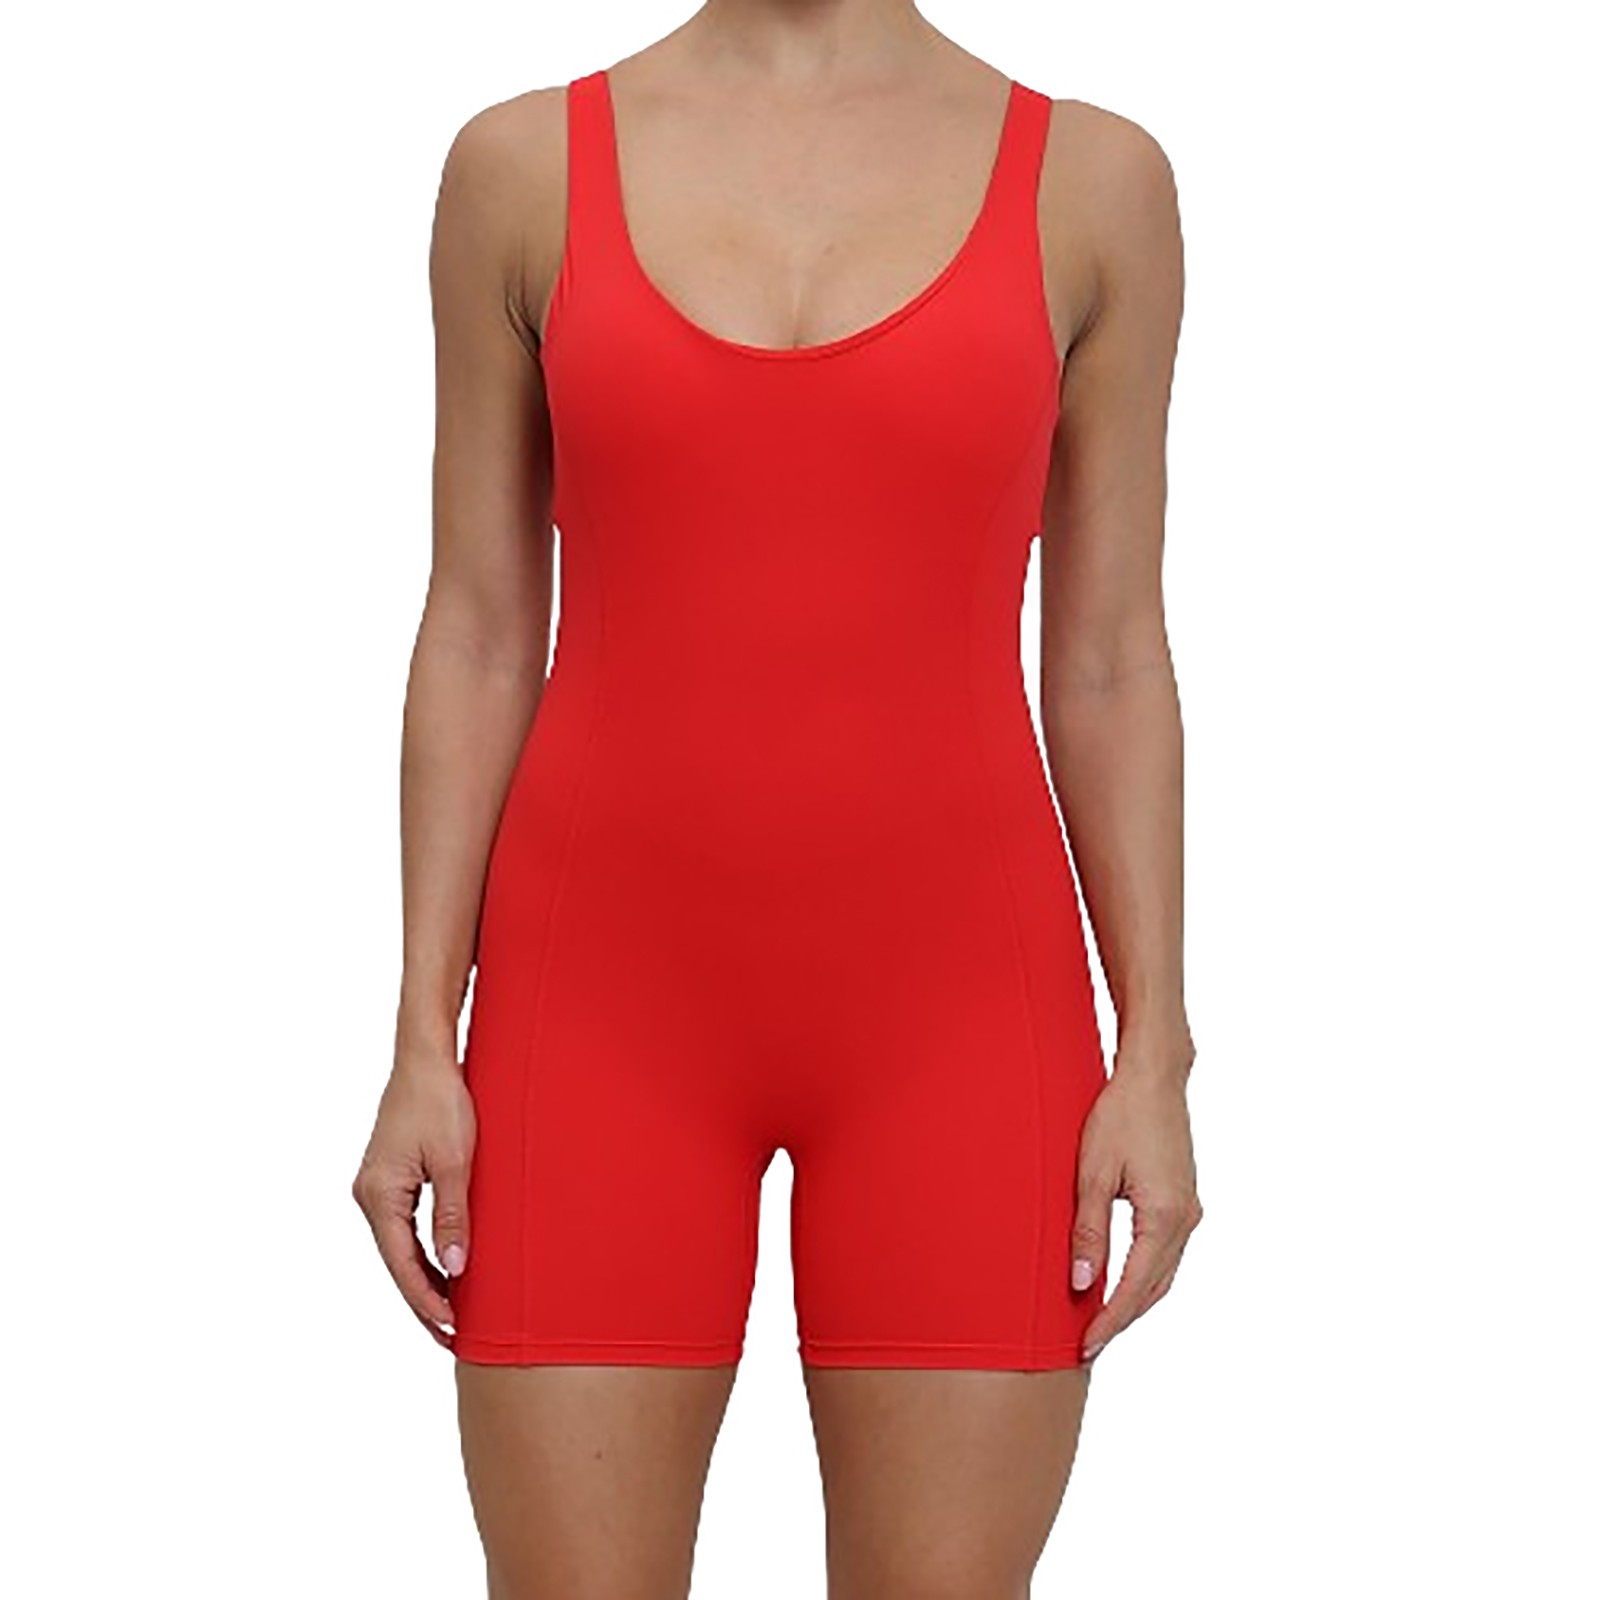 APEXFWDT Womens Sexy Bodysuit Workout Rompers One Piece Summer Outfits ...